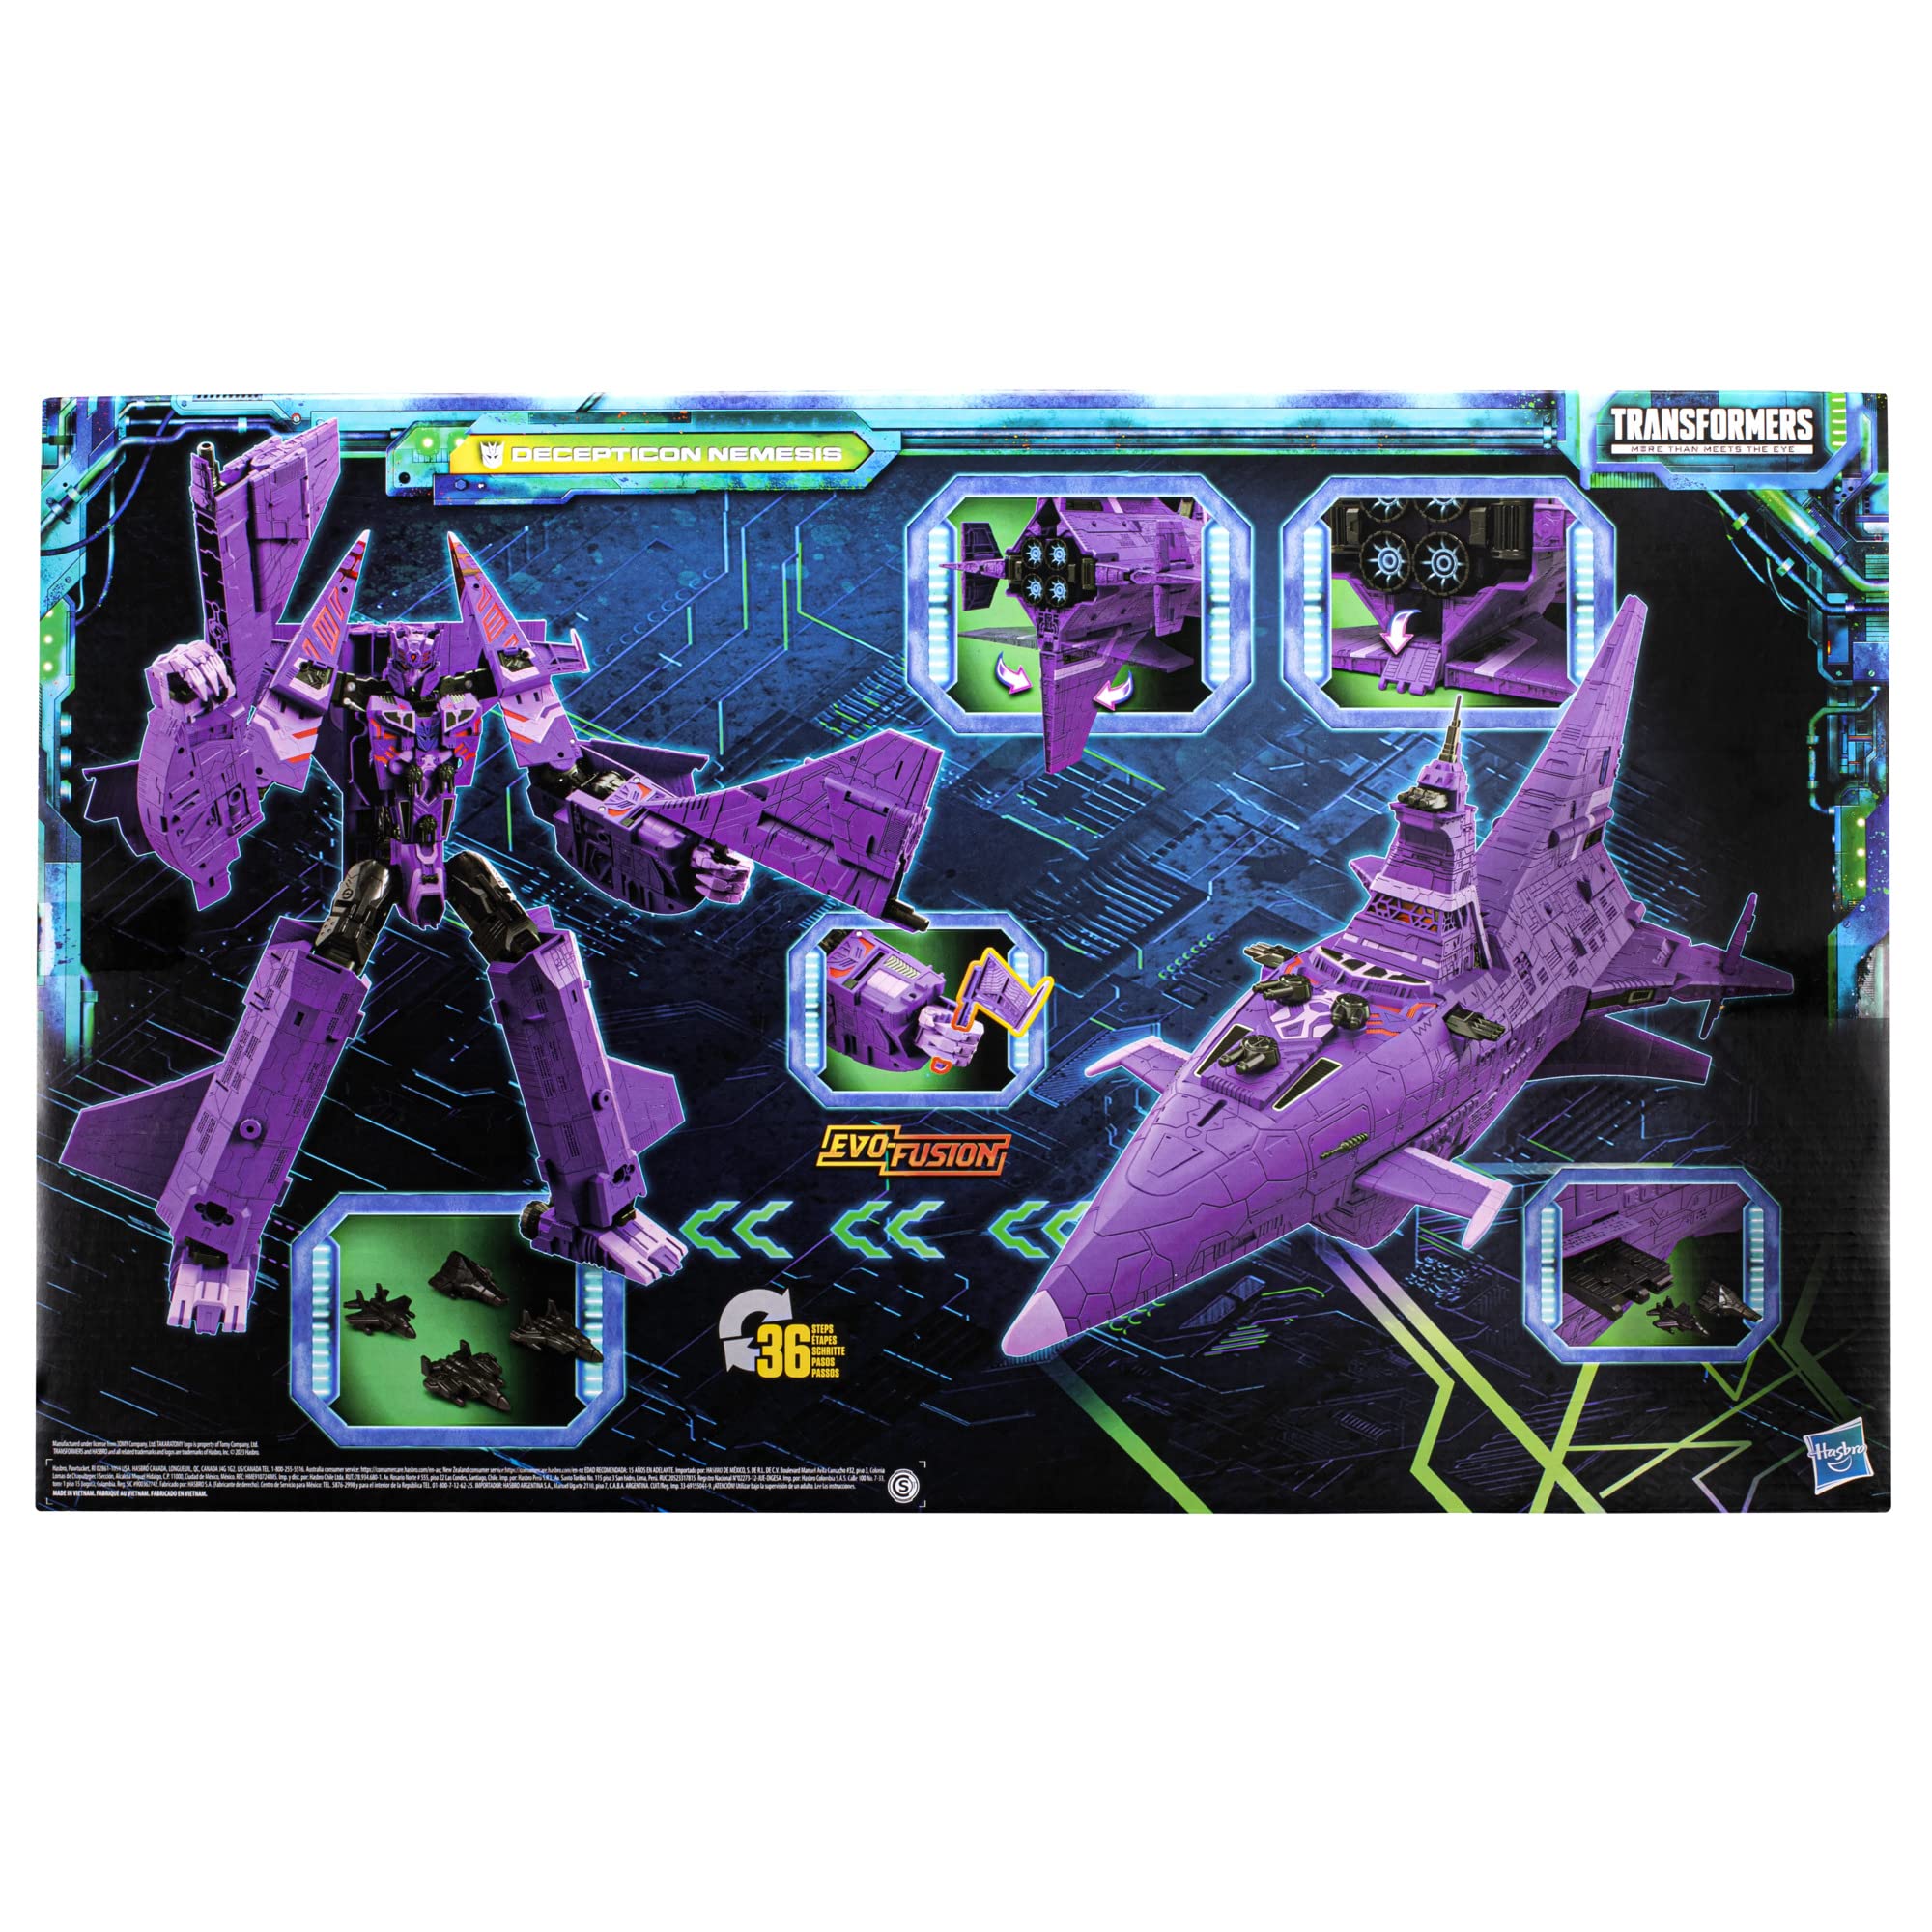 Transformers Toys Legacy Evolution Titan Decepticon Nemesis Action Figure, 23.5-inch, Adult Collectible for Ages 15 and Up